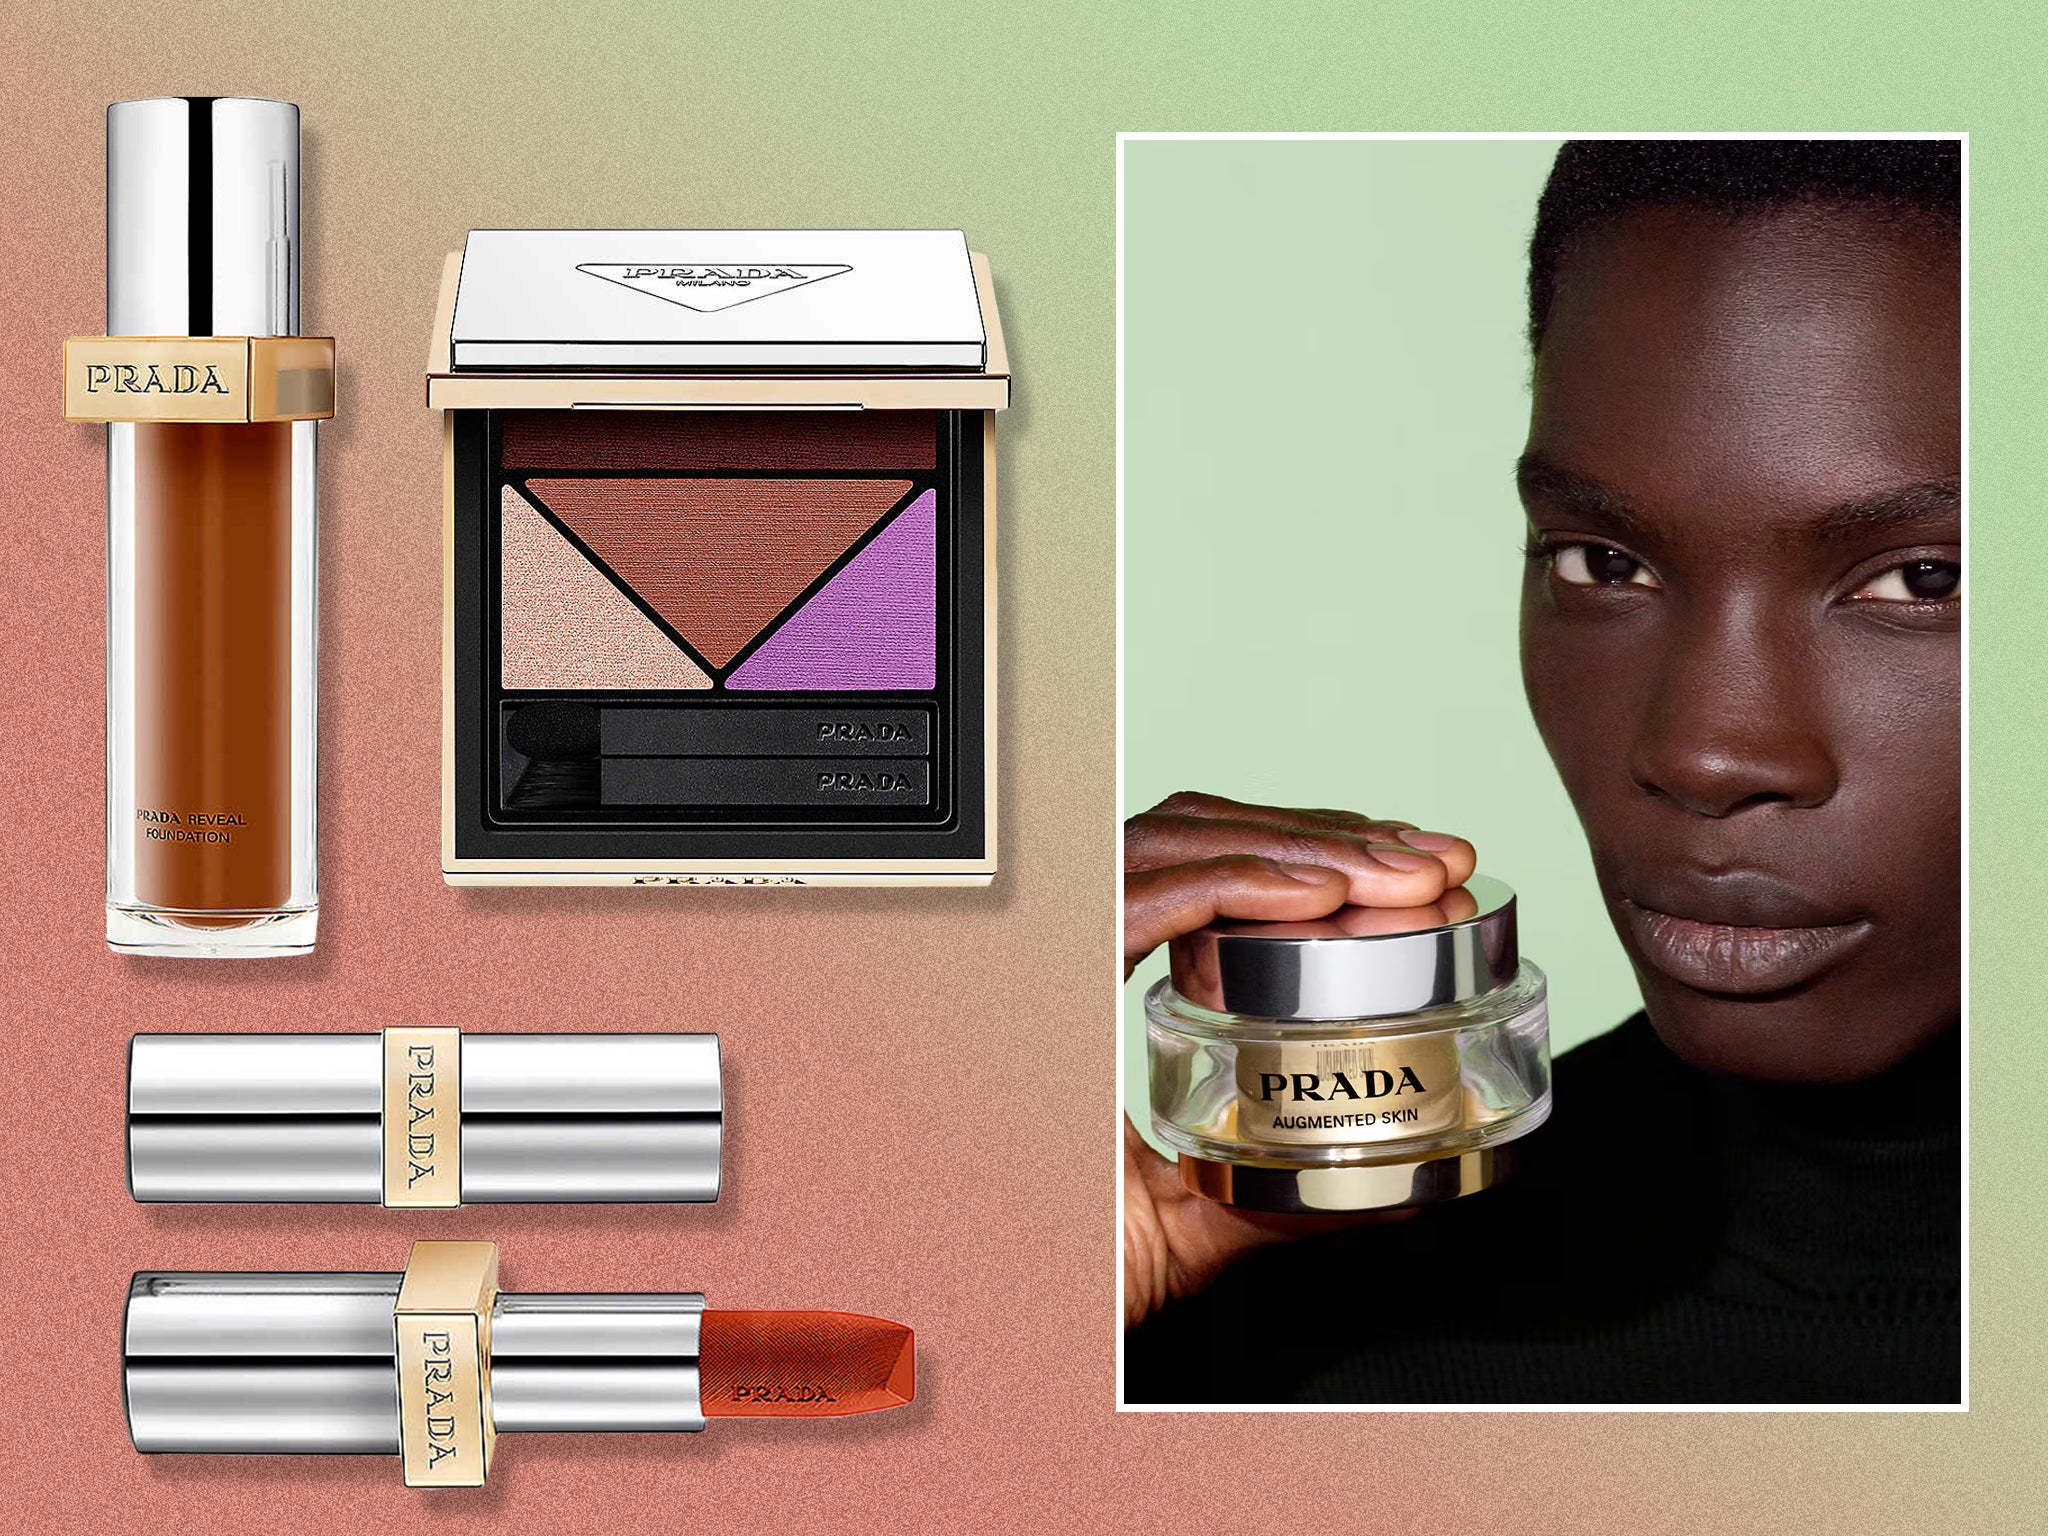 Prada Beauty launch UK: Where to buy the makeup and skincare | The